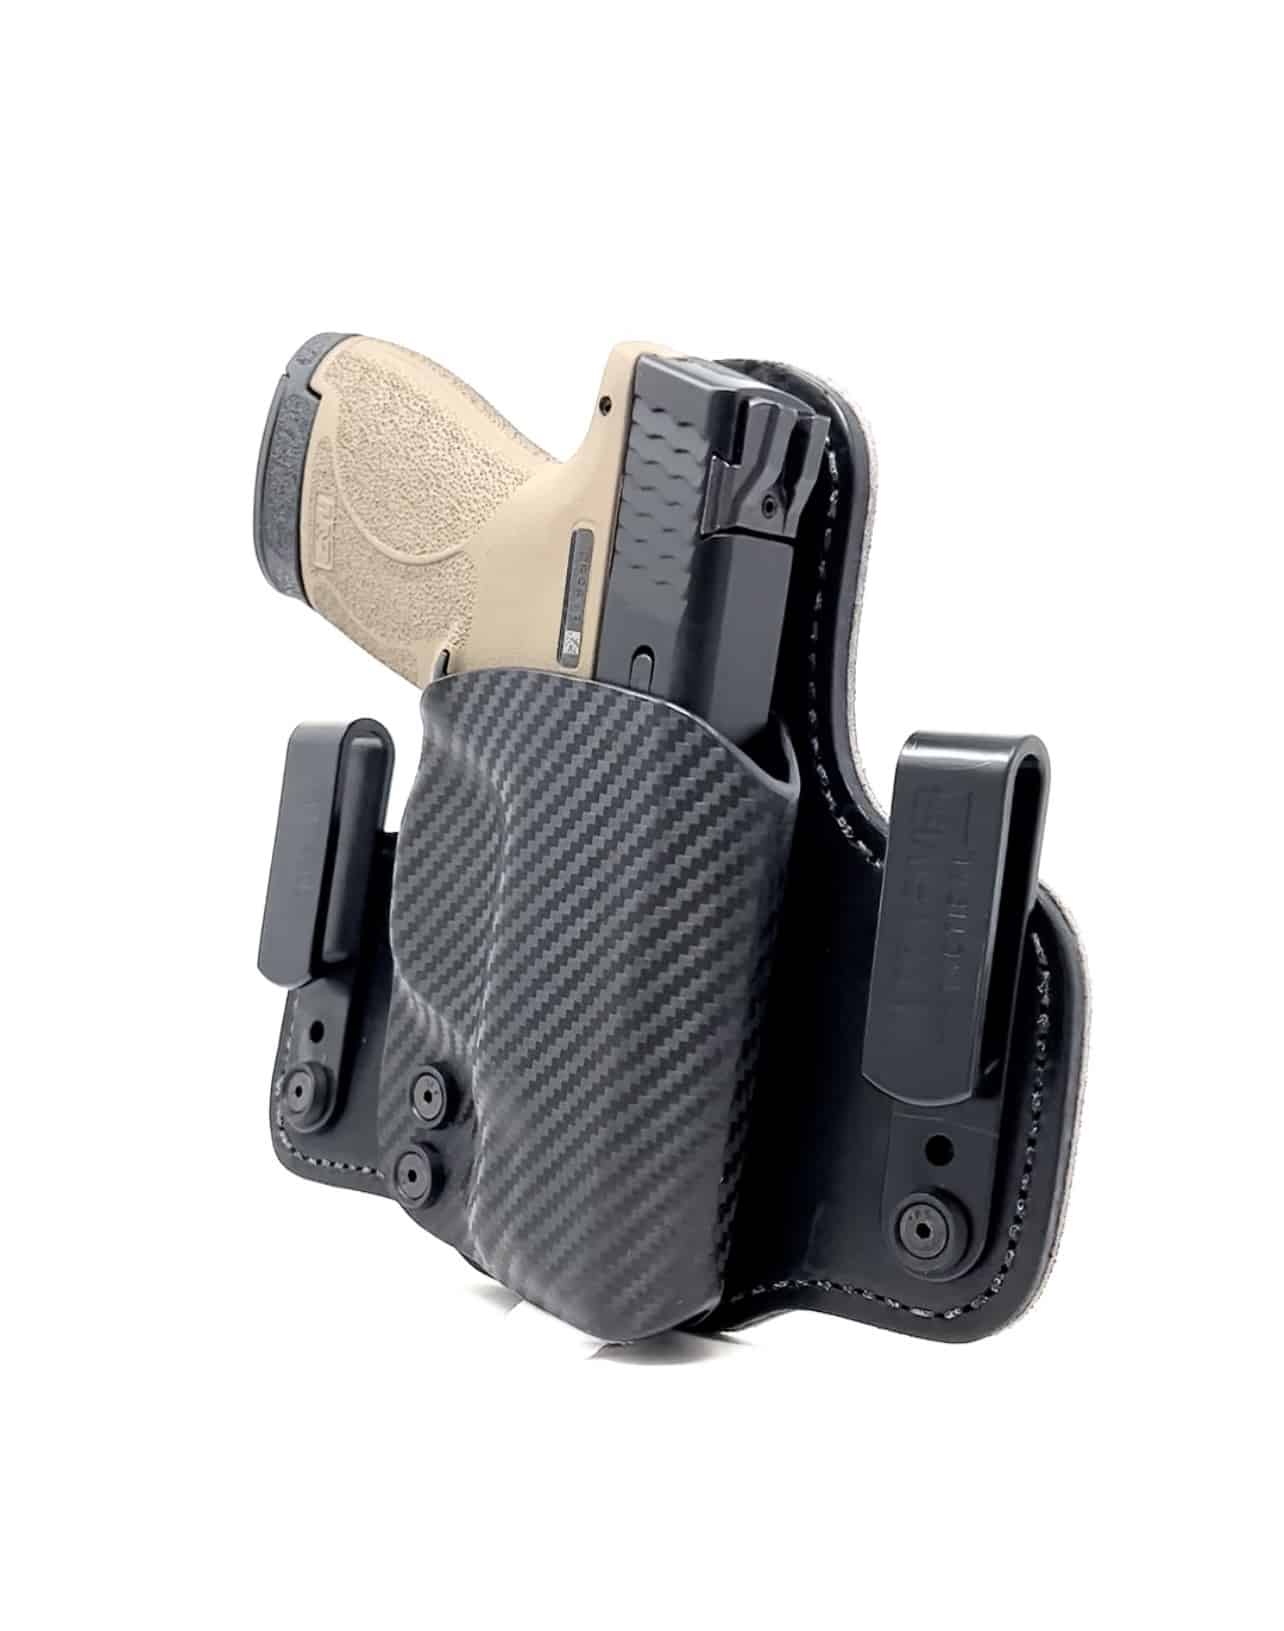 IWB Kydex/Leather Hybrid Holster small print with adjustable retention for Steyr 